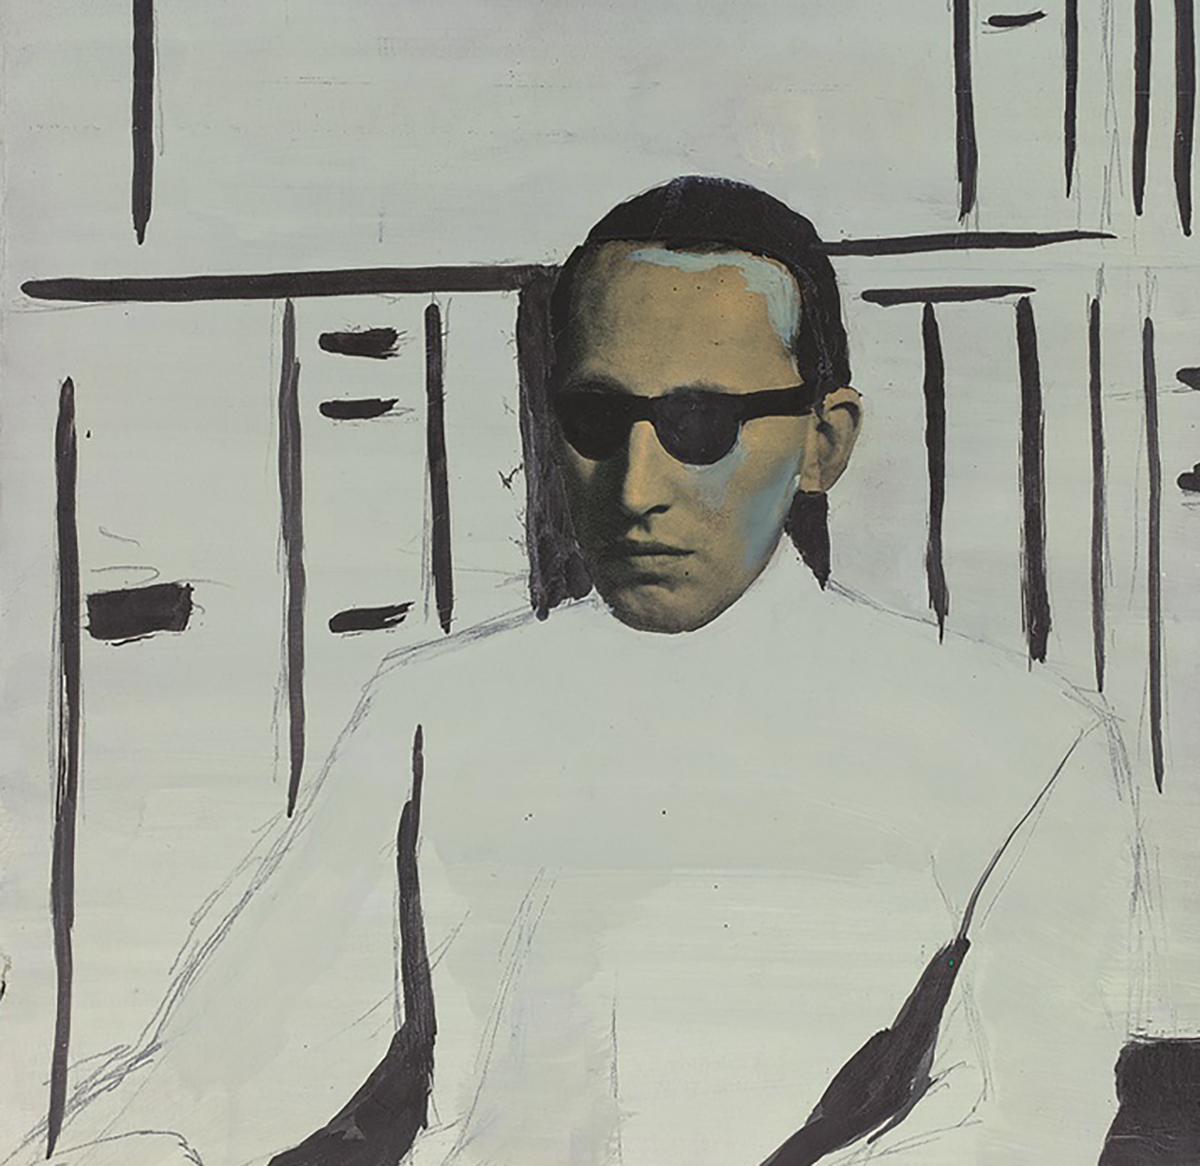 Collage painting of a man wearing sunglasses